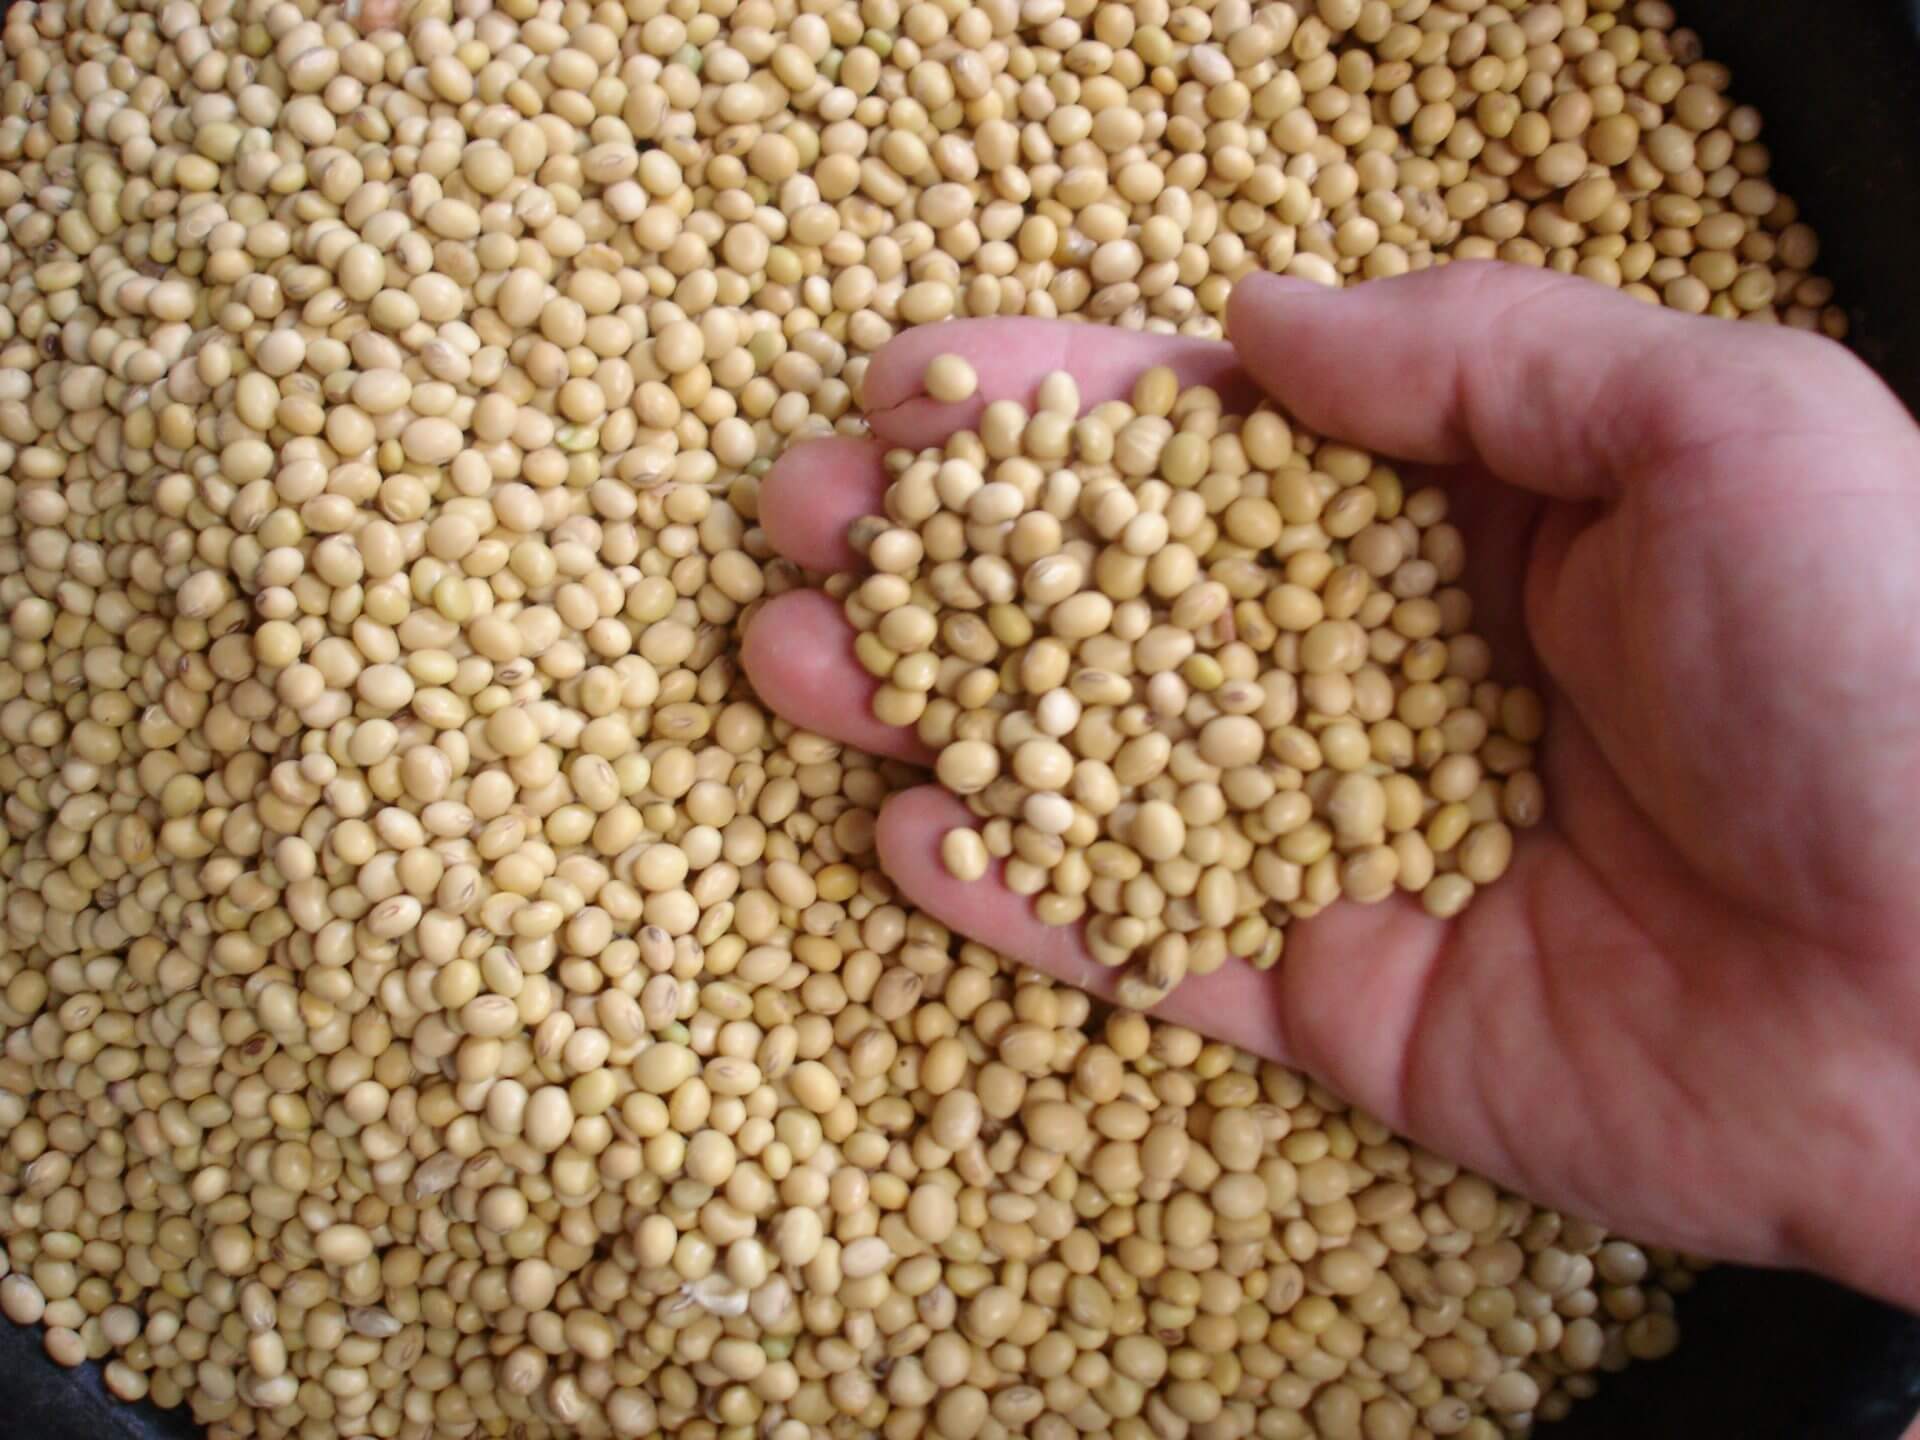 Soybean Prices are Rising as the Prognosis for South America Worsens